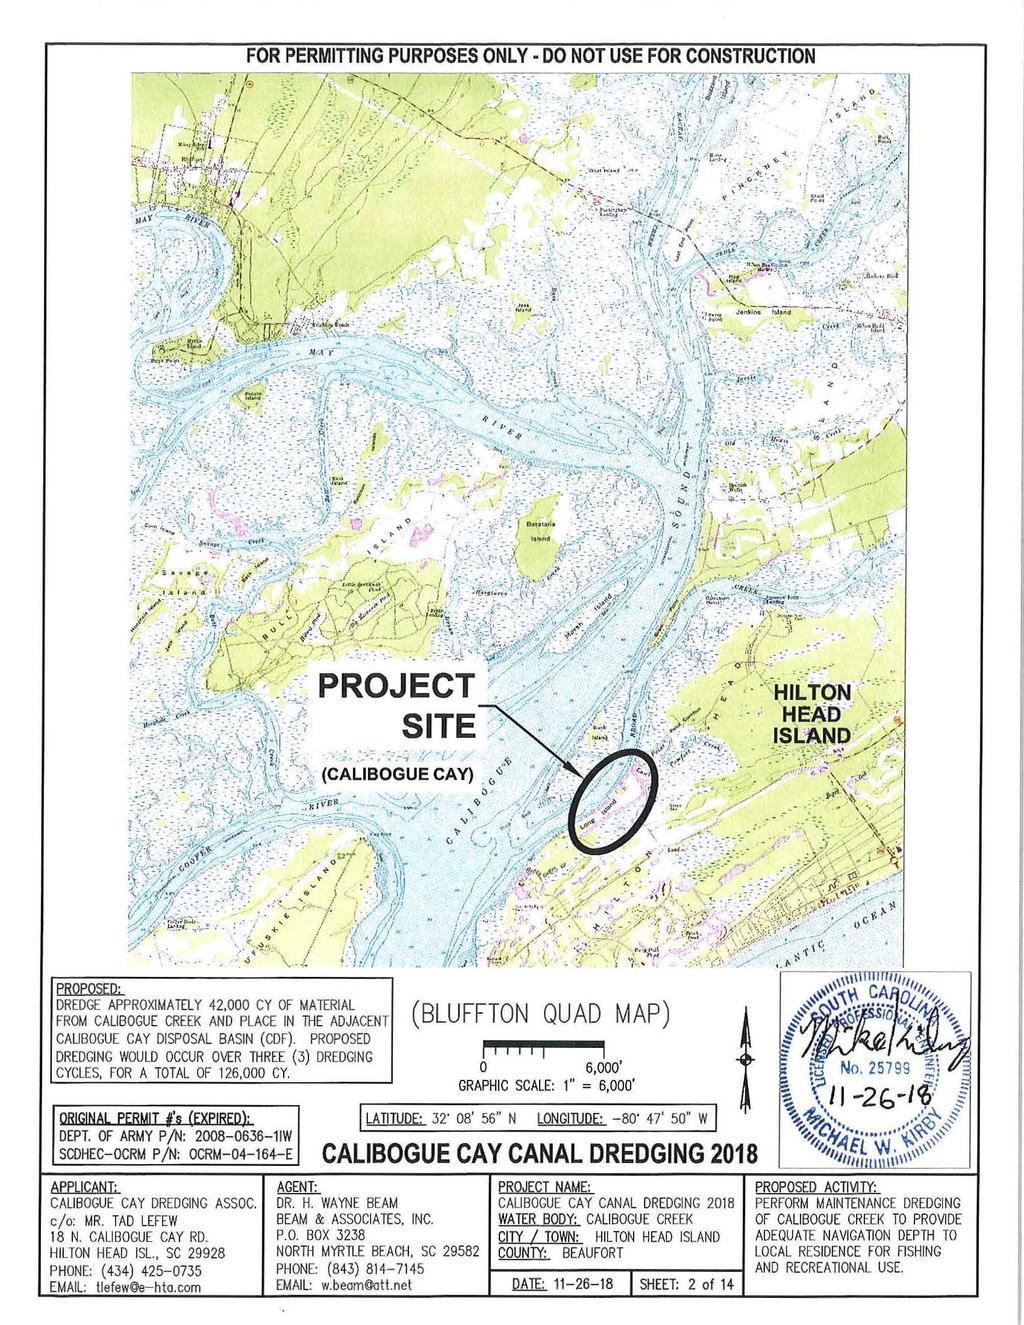 FOR PERMTTNG PURPOSES ONLY DO NOT USE FOR CONSTRUCTON DREDGE APPROXMATELY 42,000 CY OF MATERAL FROM CALBOGUE CREEK AND PLACE N THE ADJACENT CALBOGUE CAY DSPOSAL BASN (CDF).